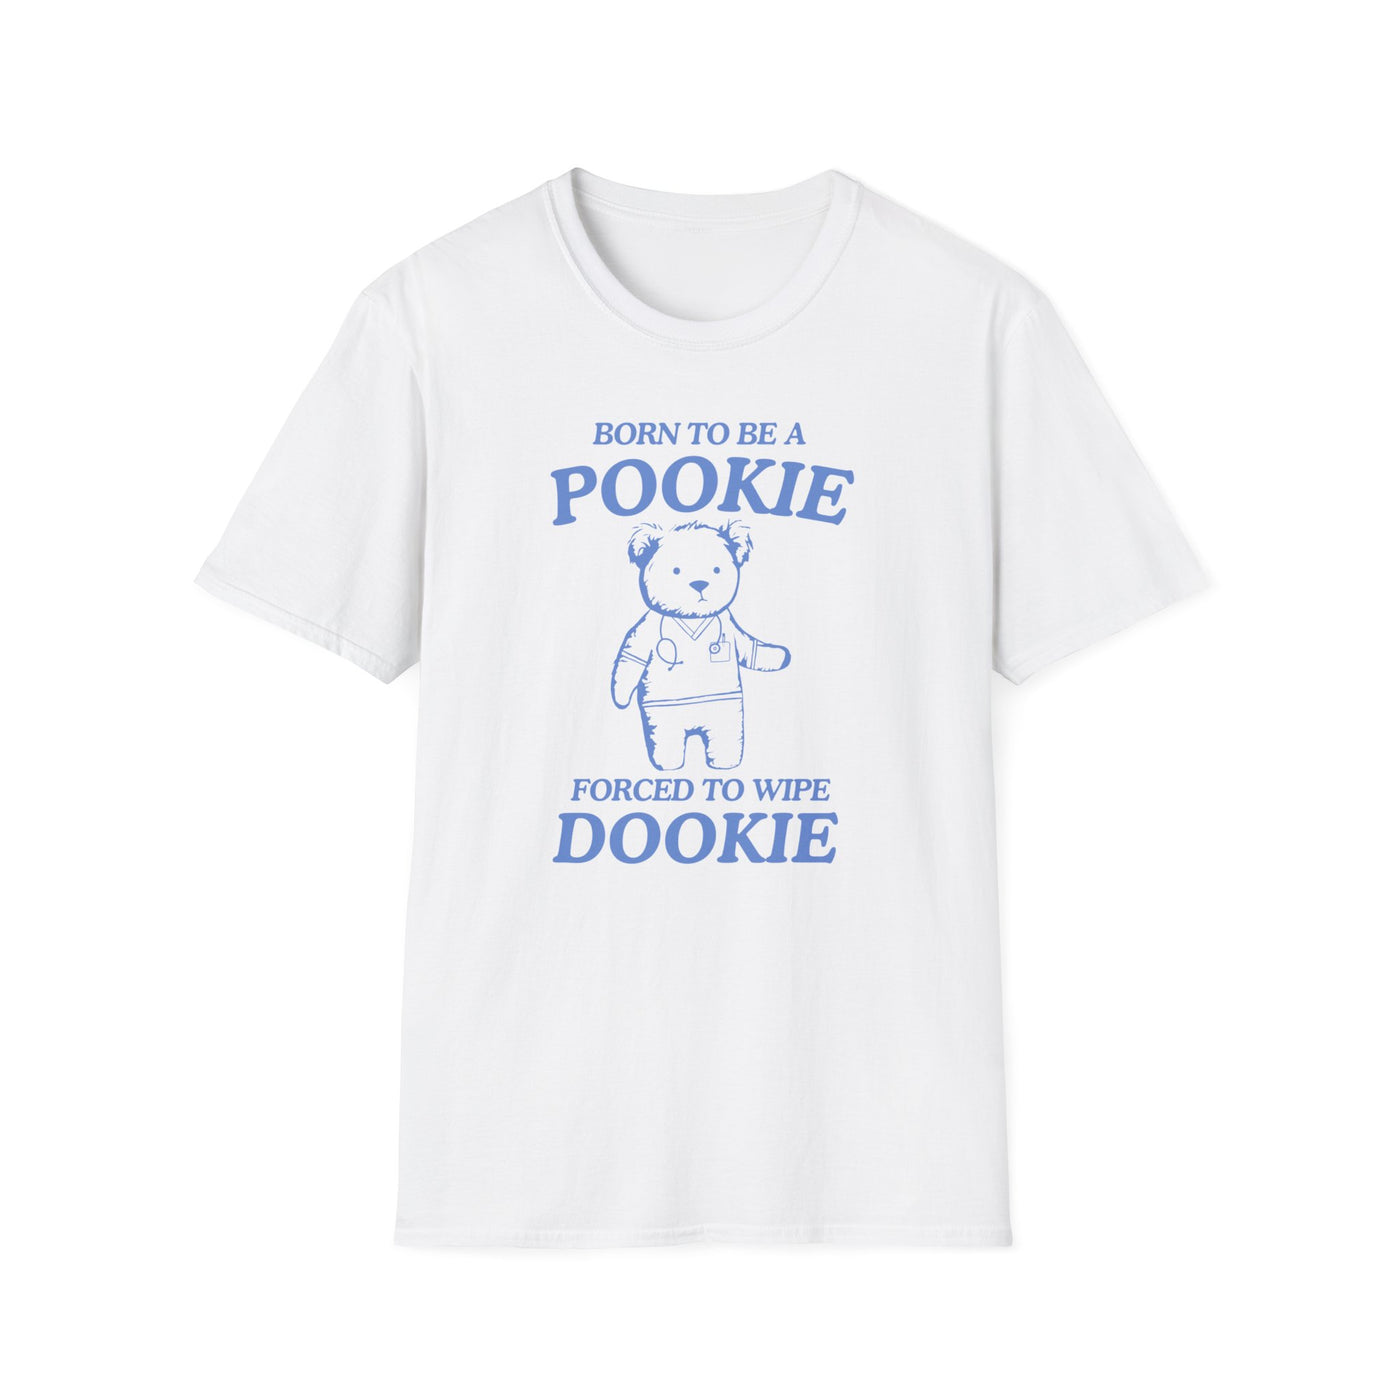 Born To Be A Pookie Forced To Wipe Dookie